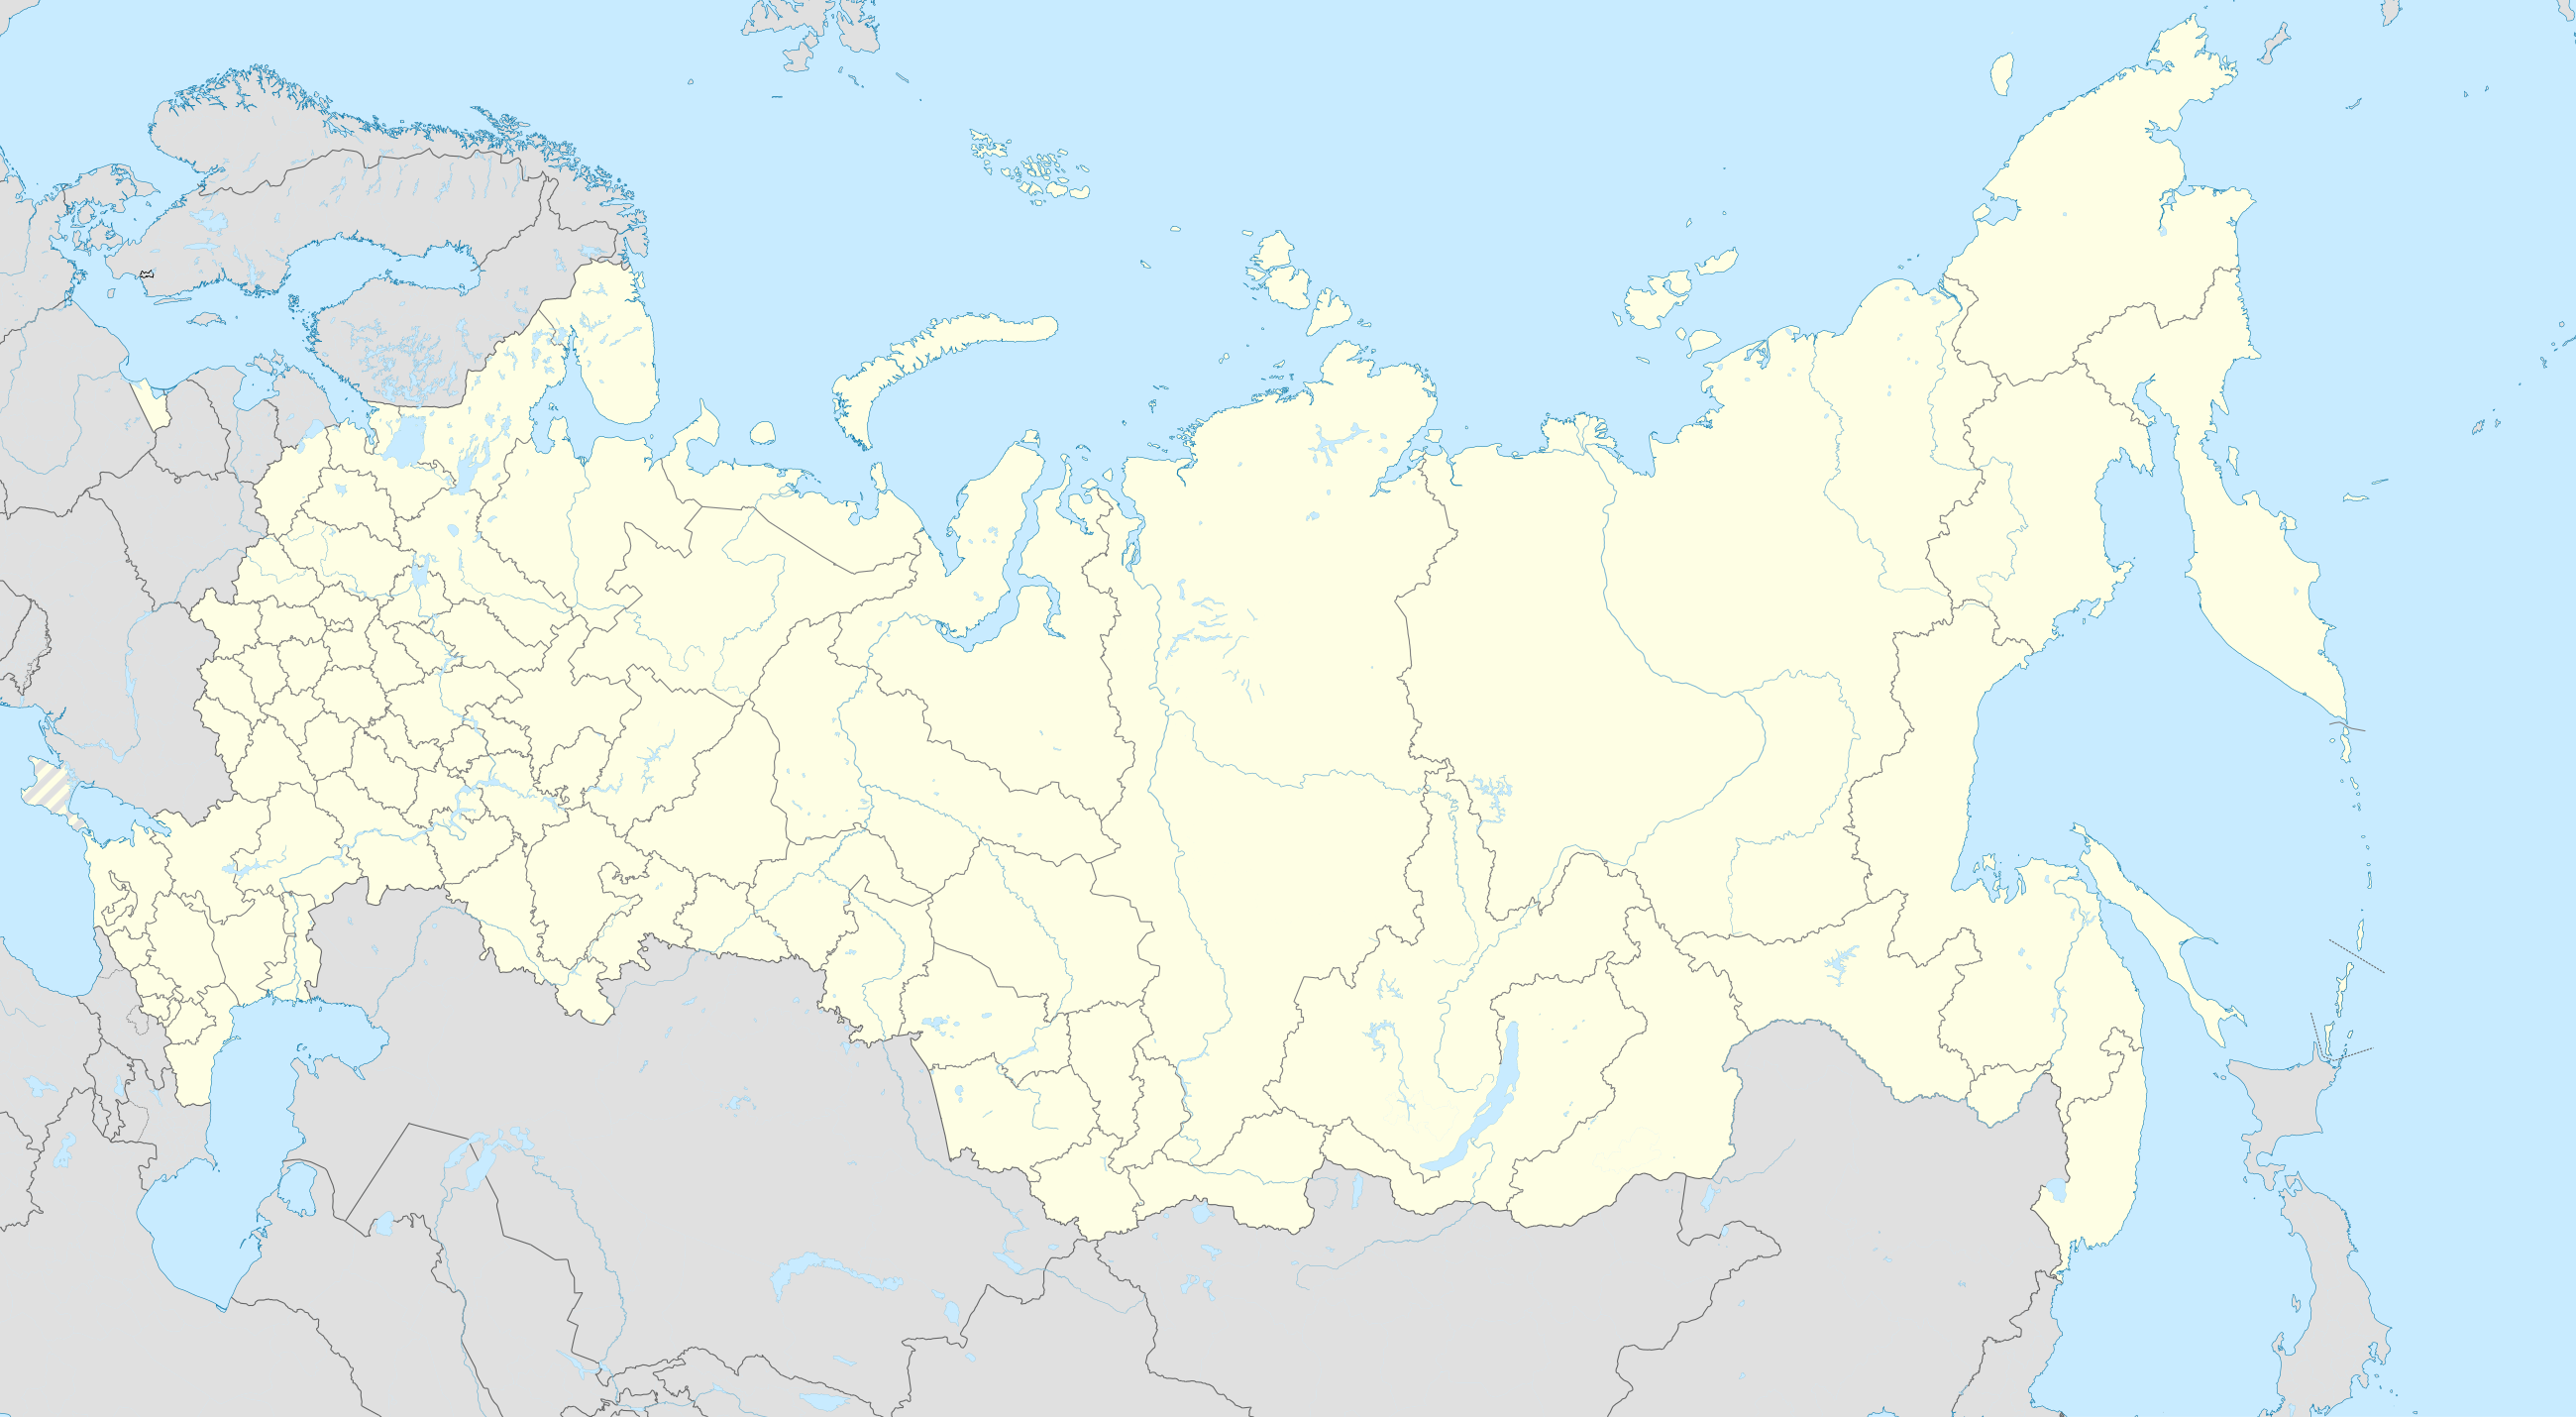 JayPlaysStuff/maptest is located in Russia